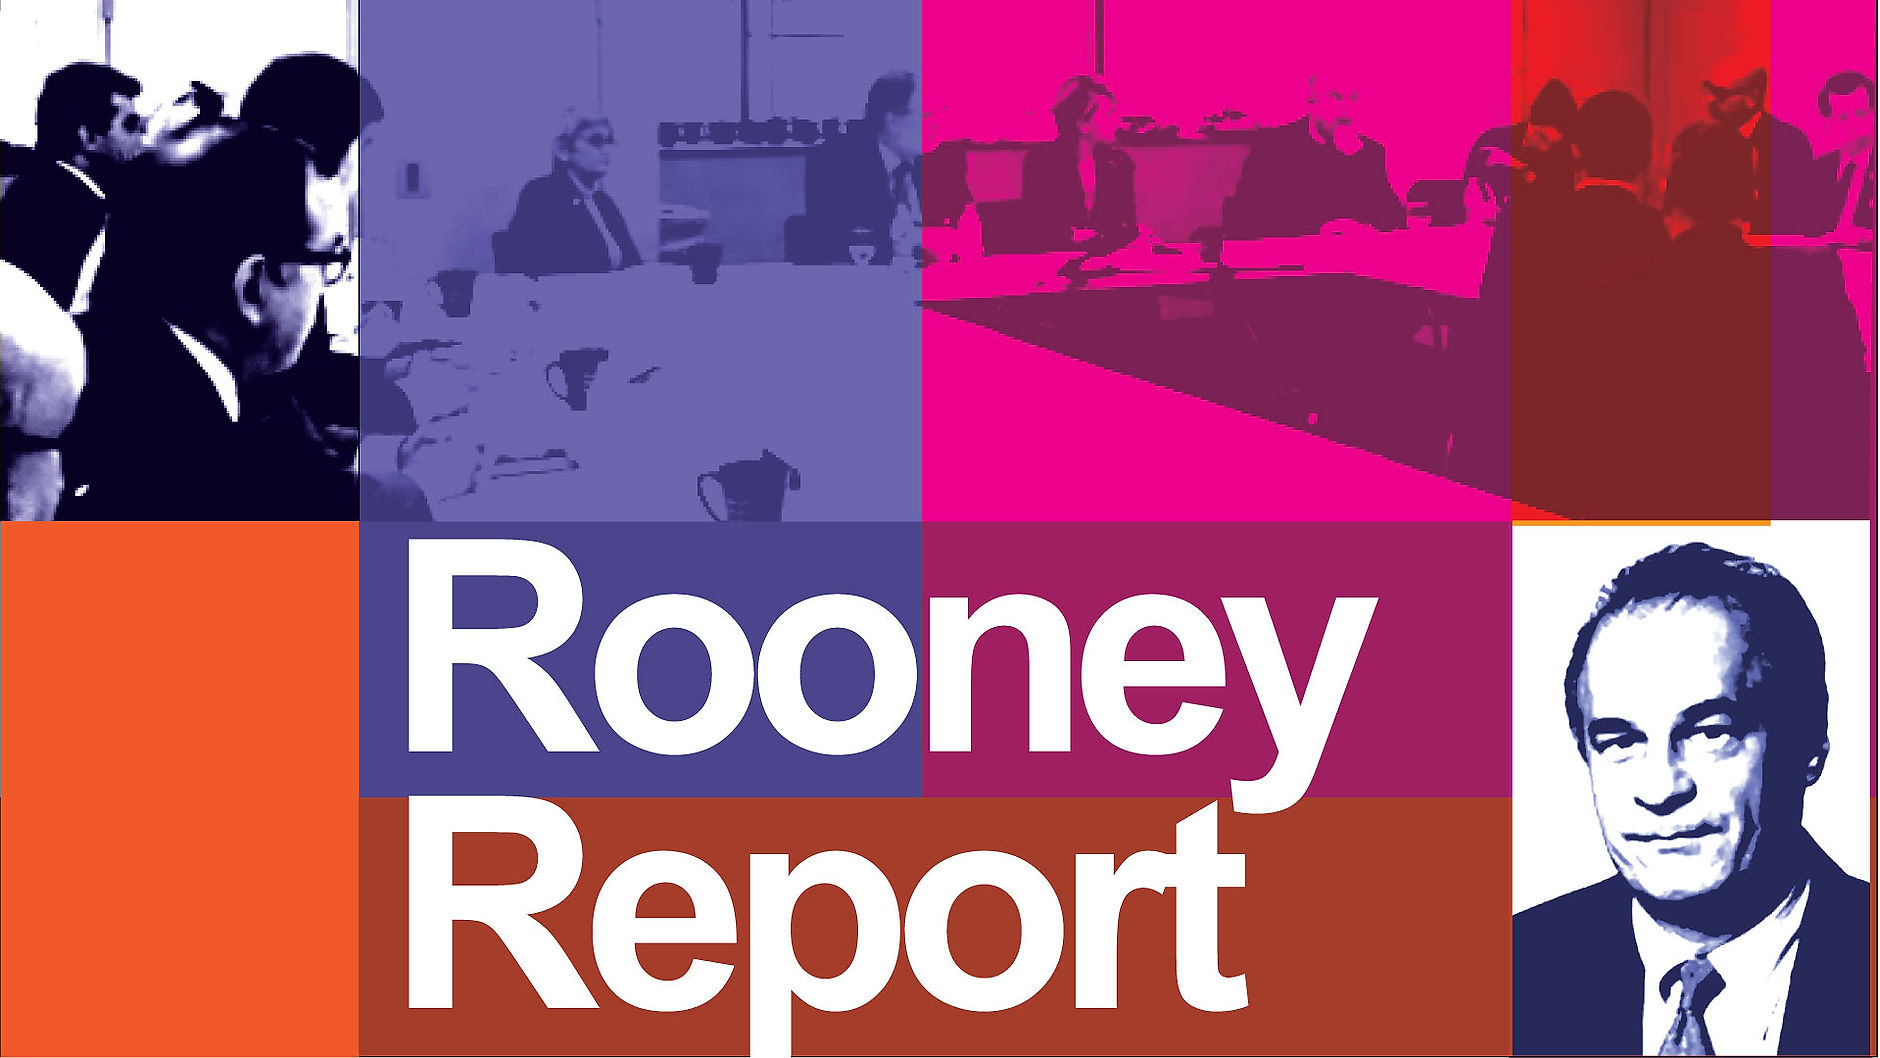 The Rooney Report